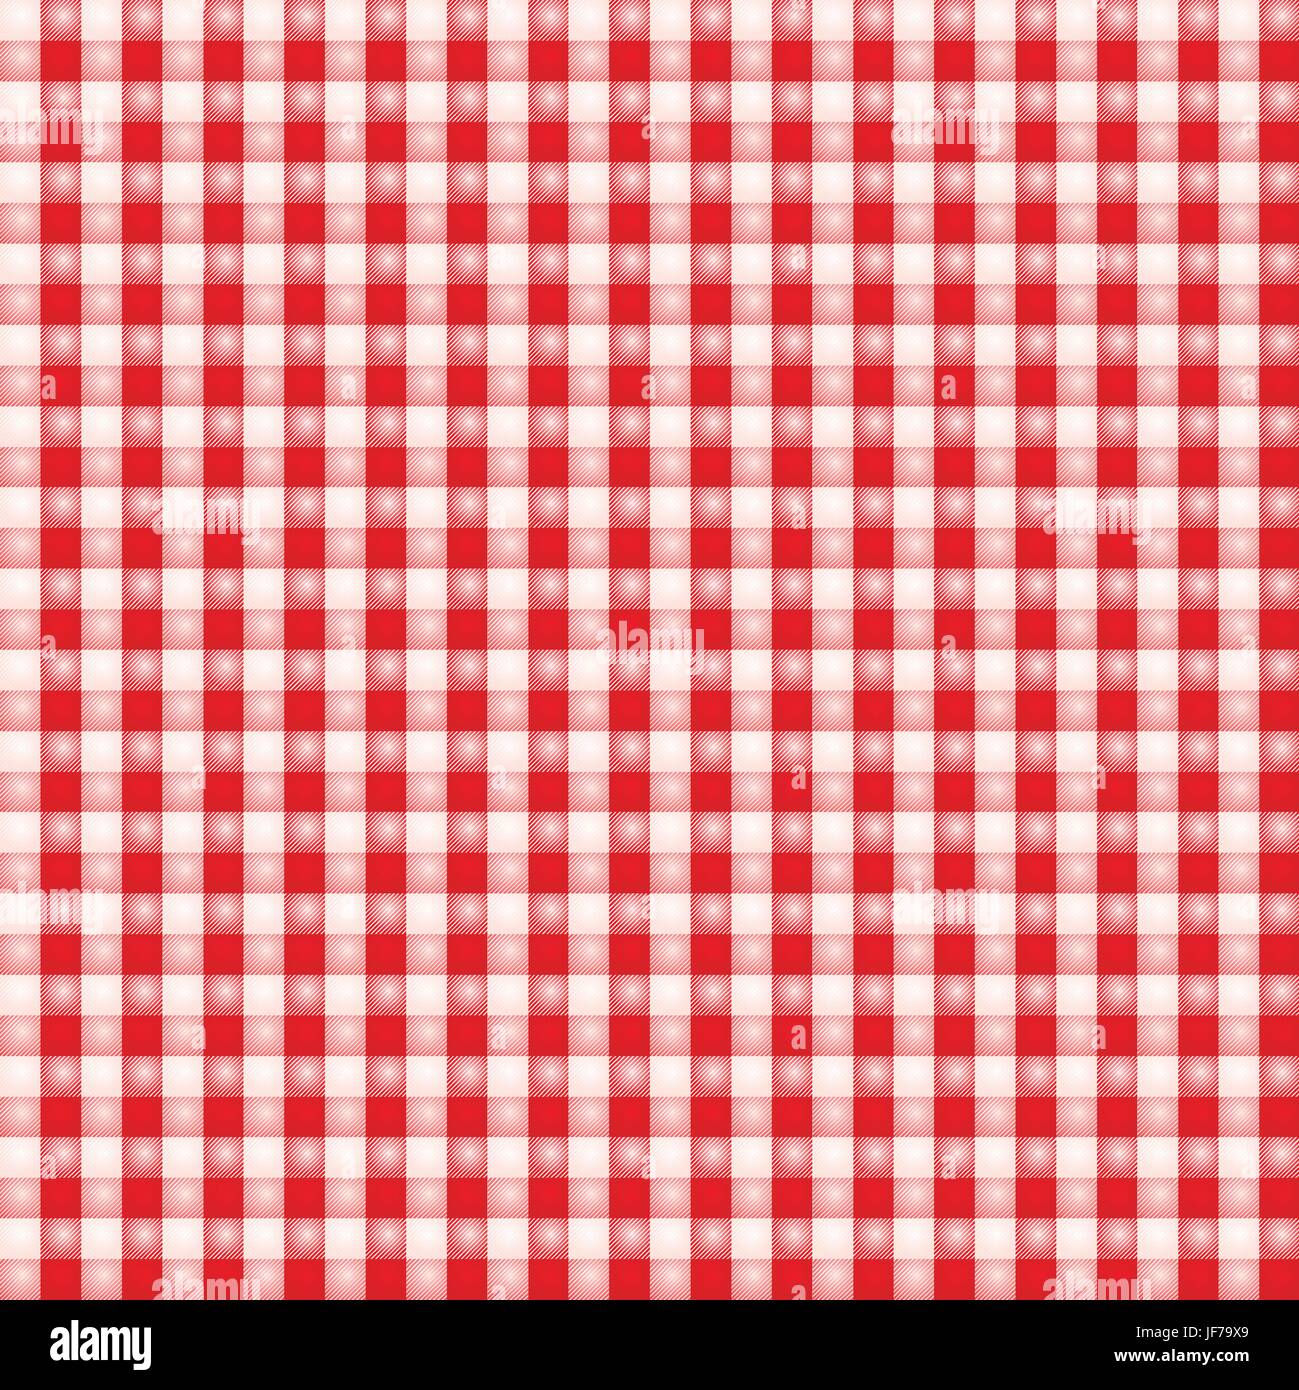 small red and white patterned fabric with checks Stock Vector